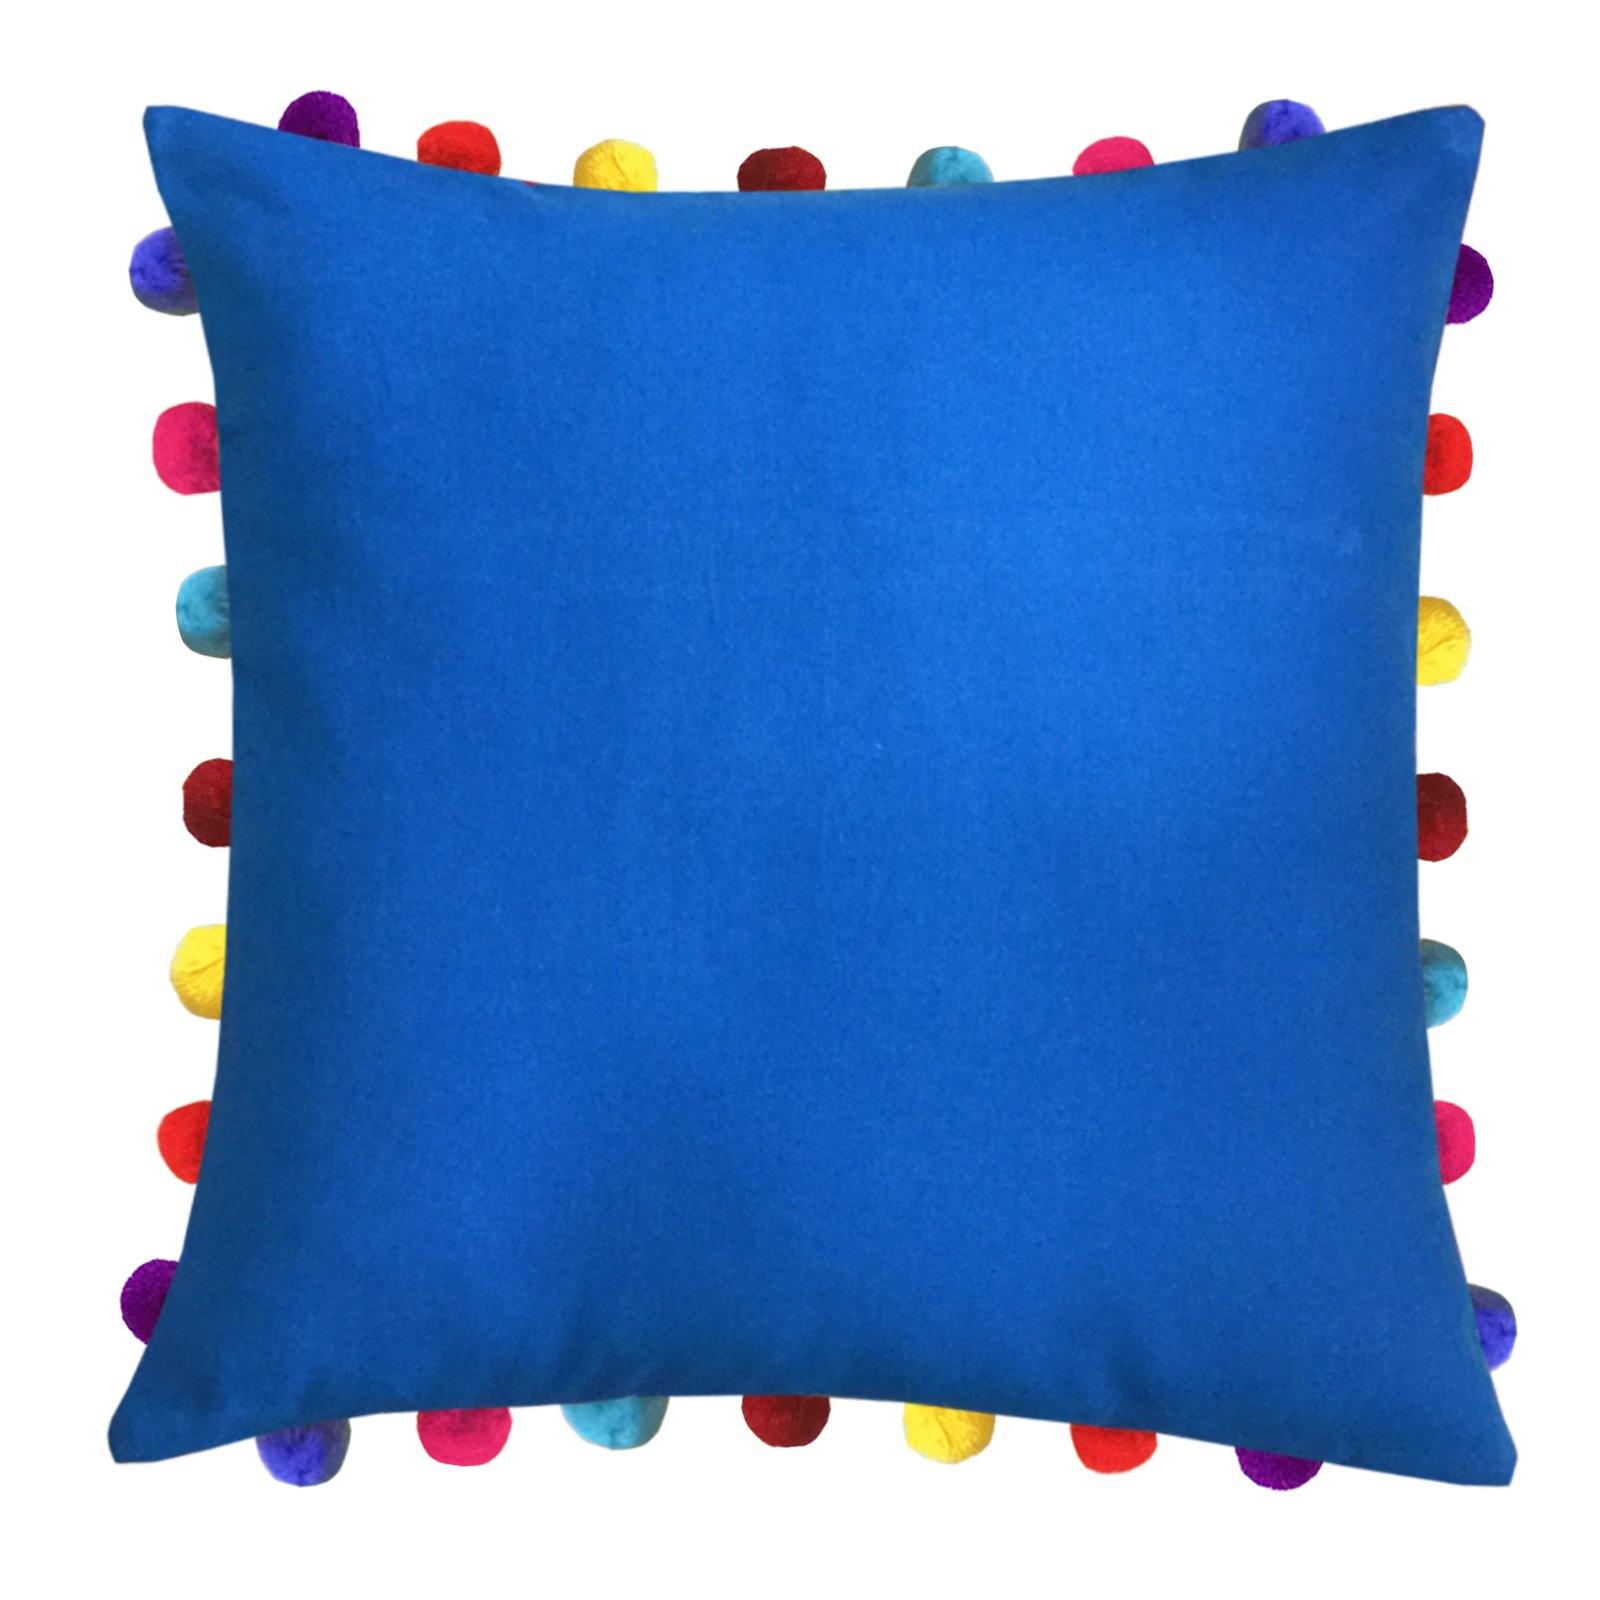 Lushomes Sky Diver Cushion Cover with Colorful Pom Poms (Single pc, 20 x 20”) - Lushomes